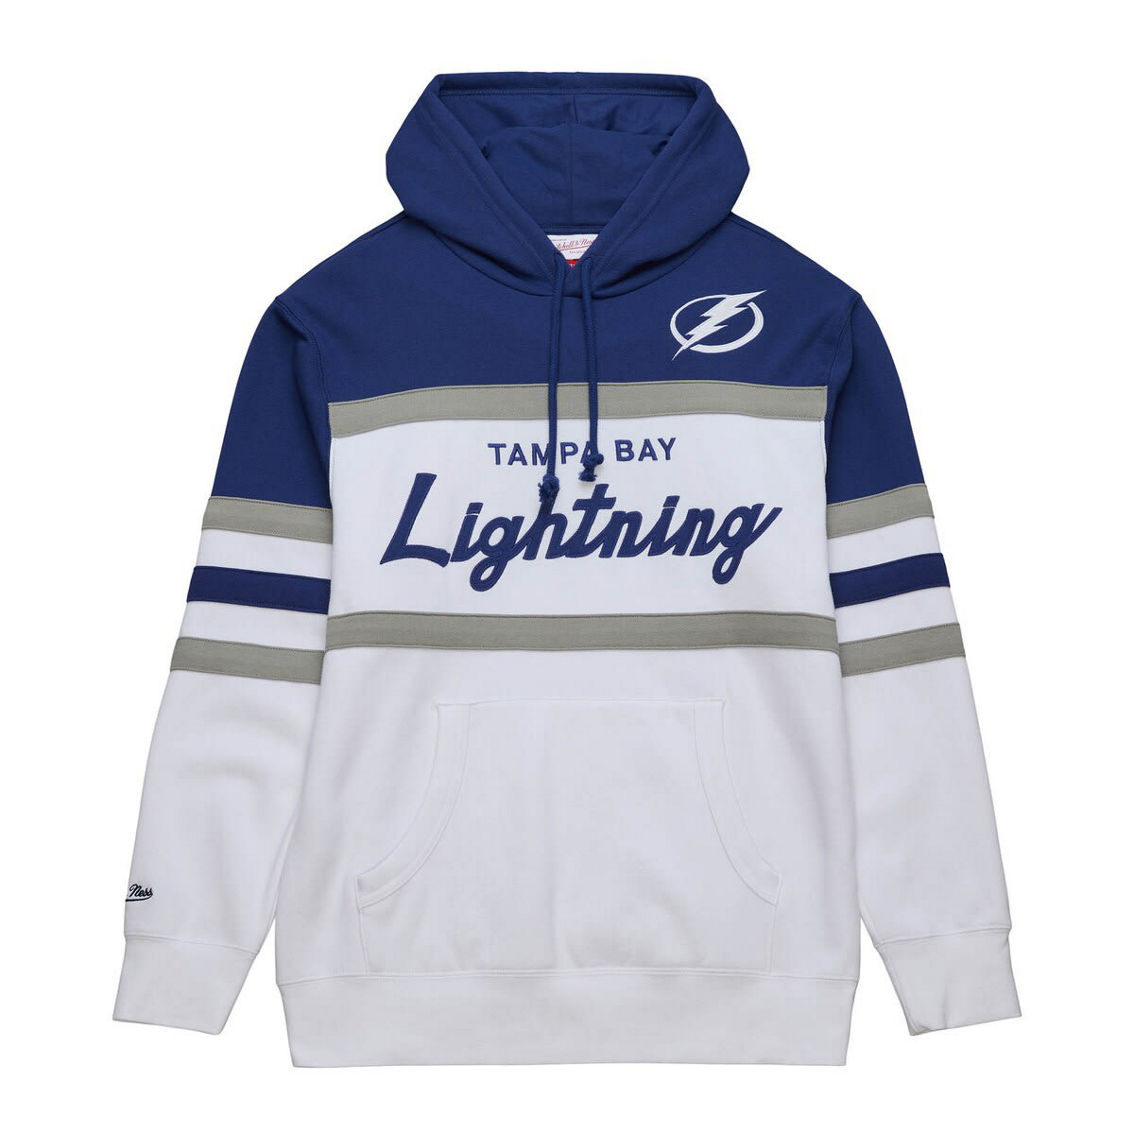 Mitchell & Ness Men's White/Blue Tampa Bay Lightning Head Coach Pullover Hoodie - Image 3 of 4